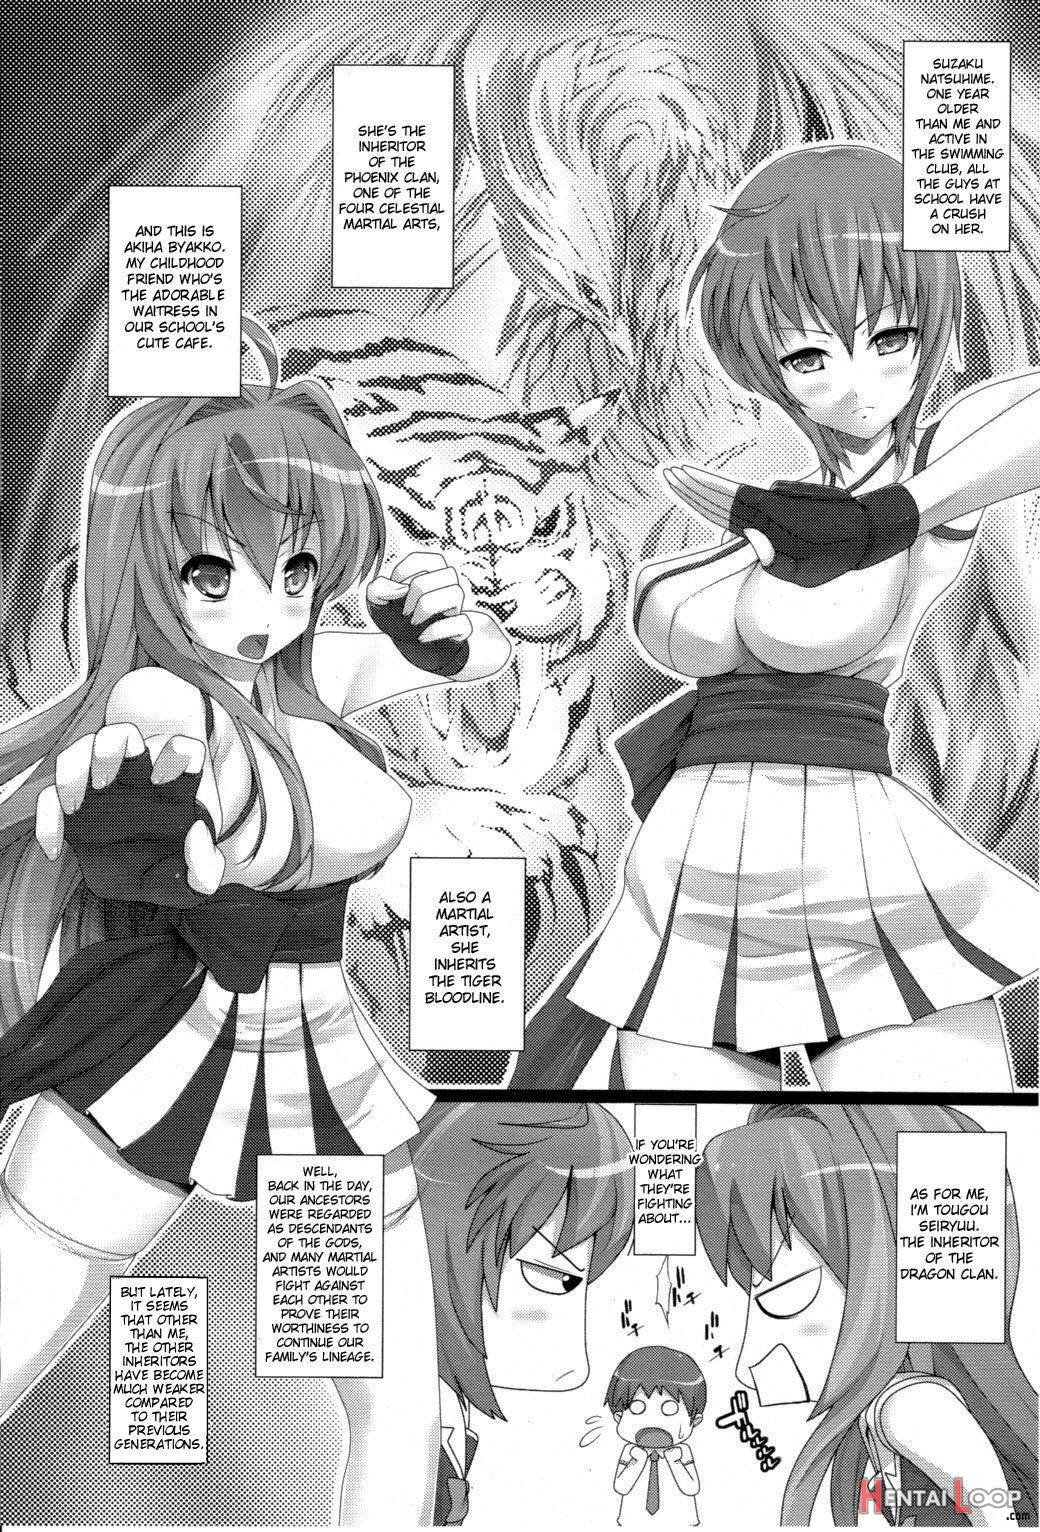 Impregnate me, Seiryu-kun – A Fight Between Unscrupulous Girls page 2